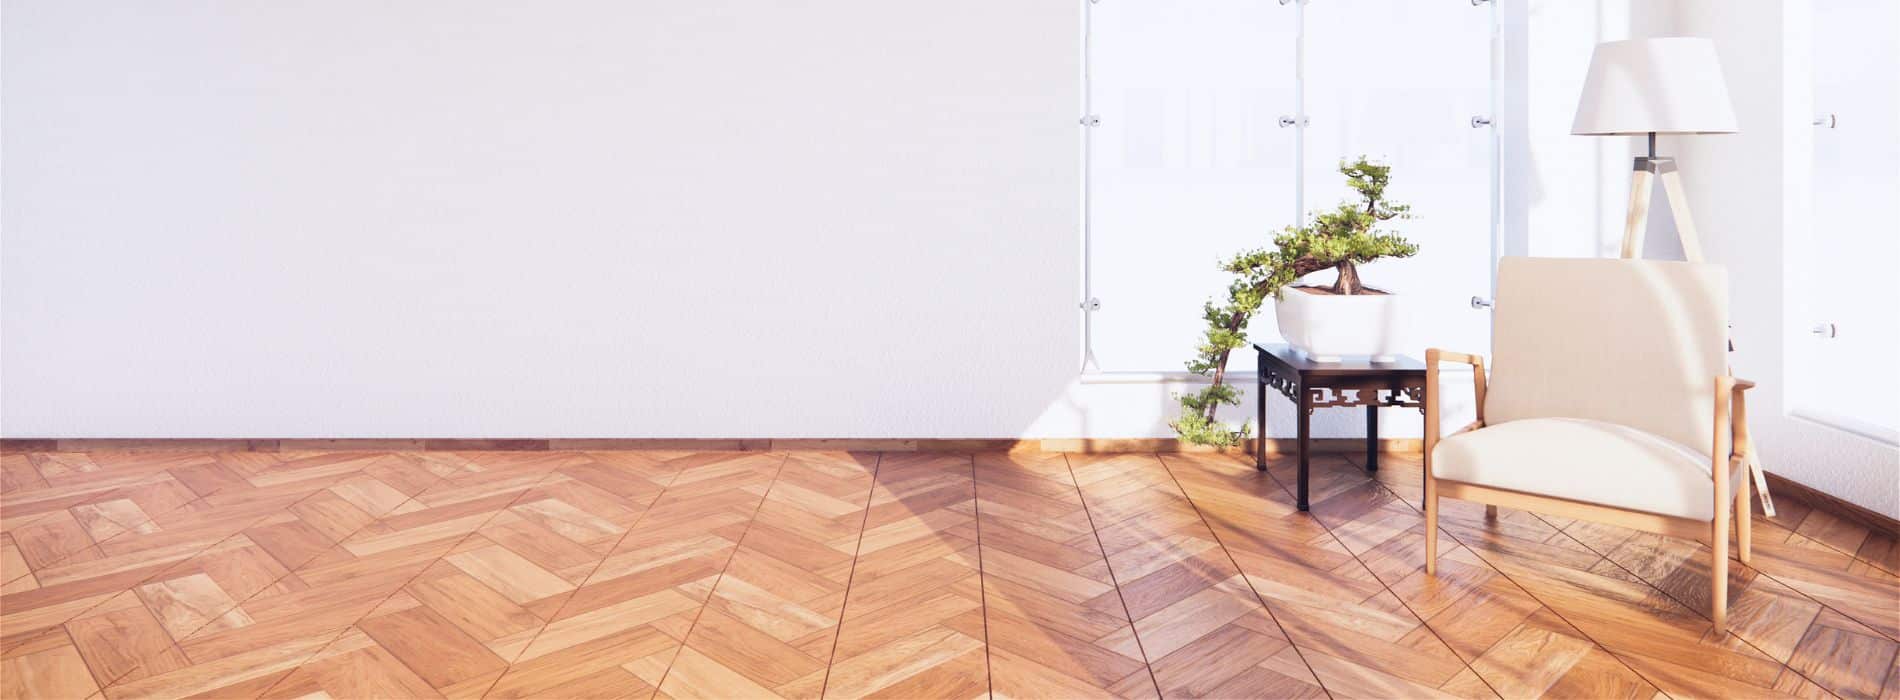 Discover the Trend: Wooden Floors in Interior Design | Tropical Paradise Aesthetics